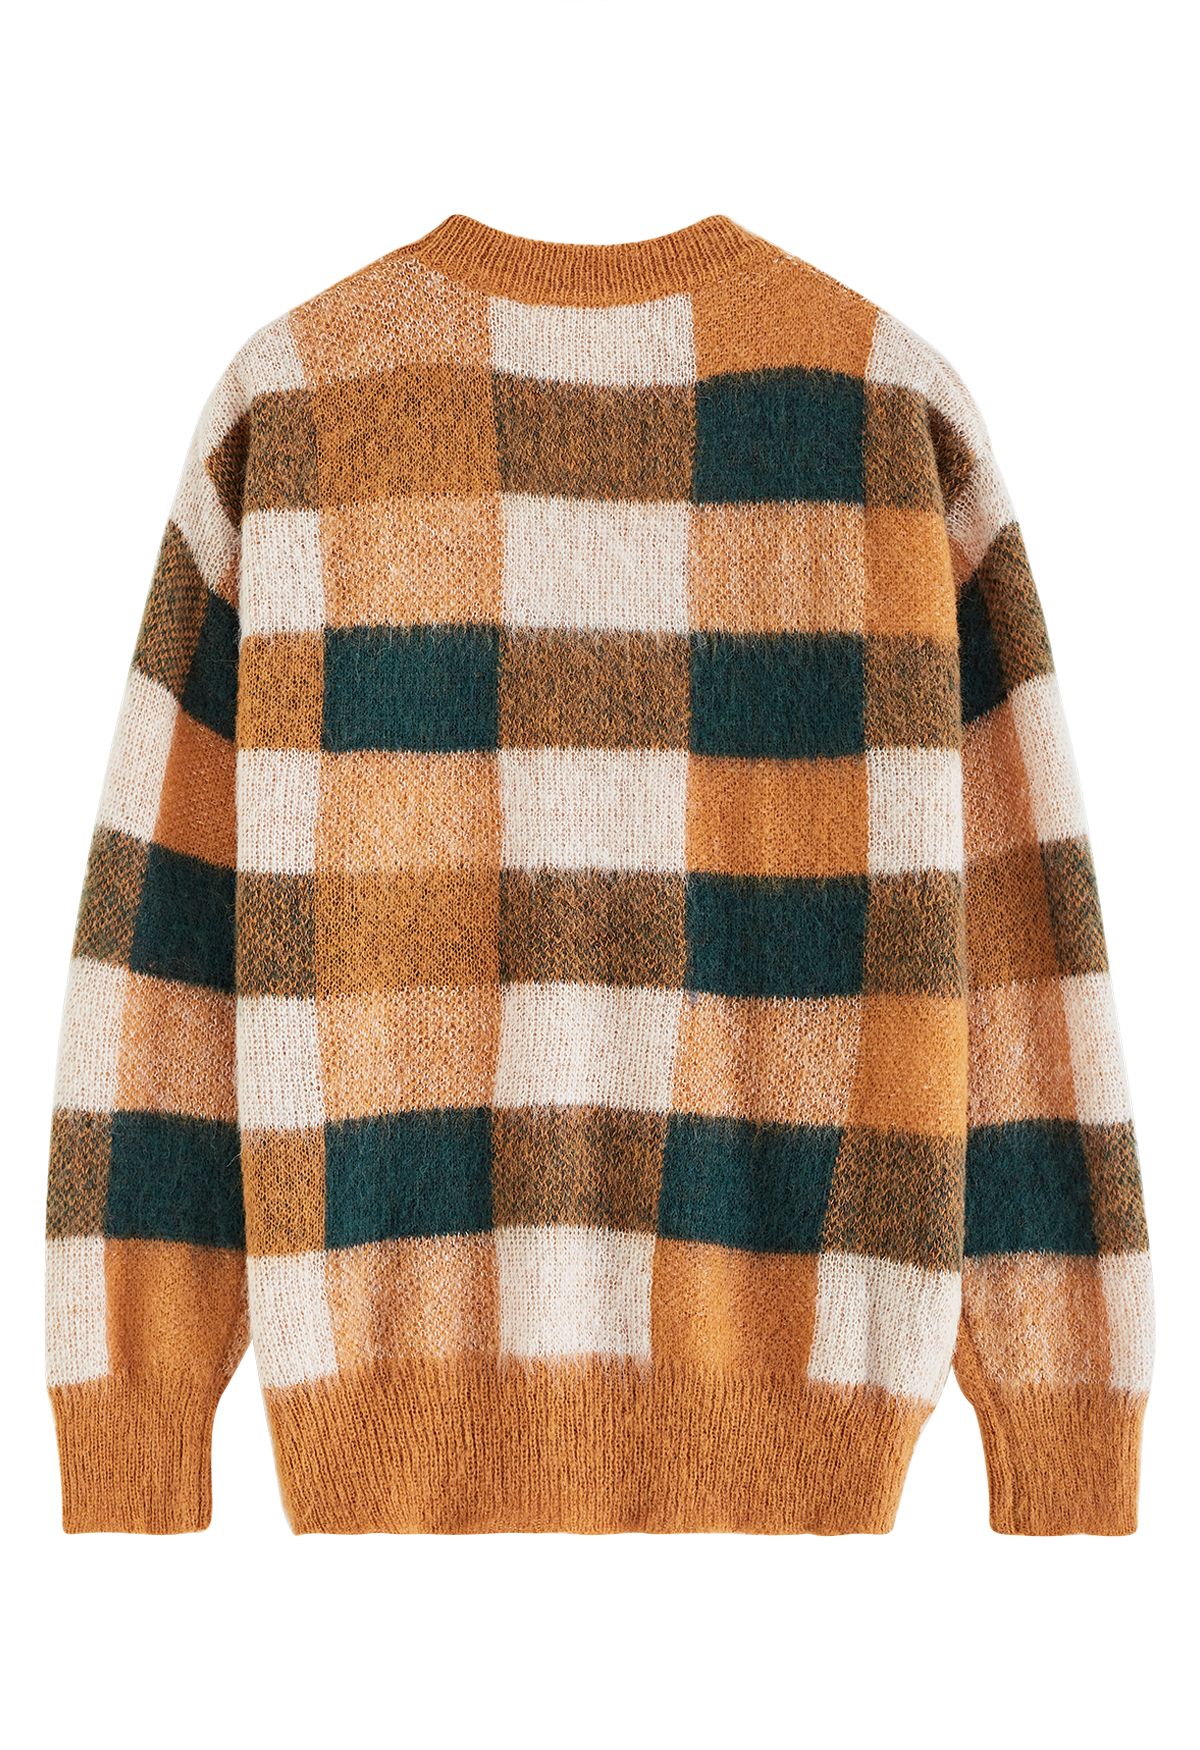 Colorful Check Pattern Fuzzy Knit Sweater